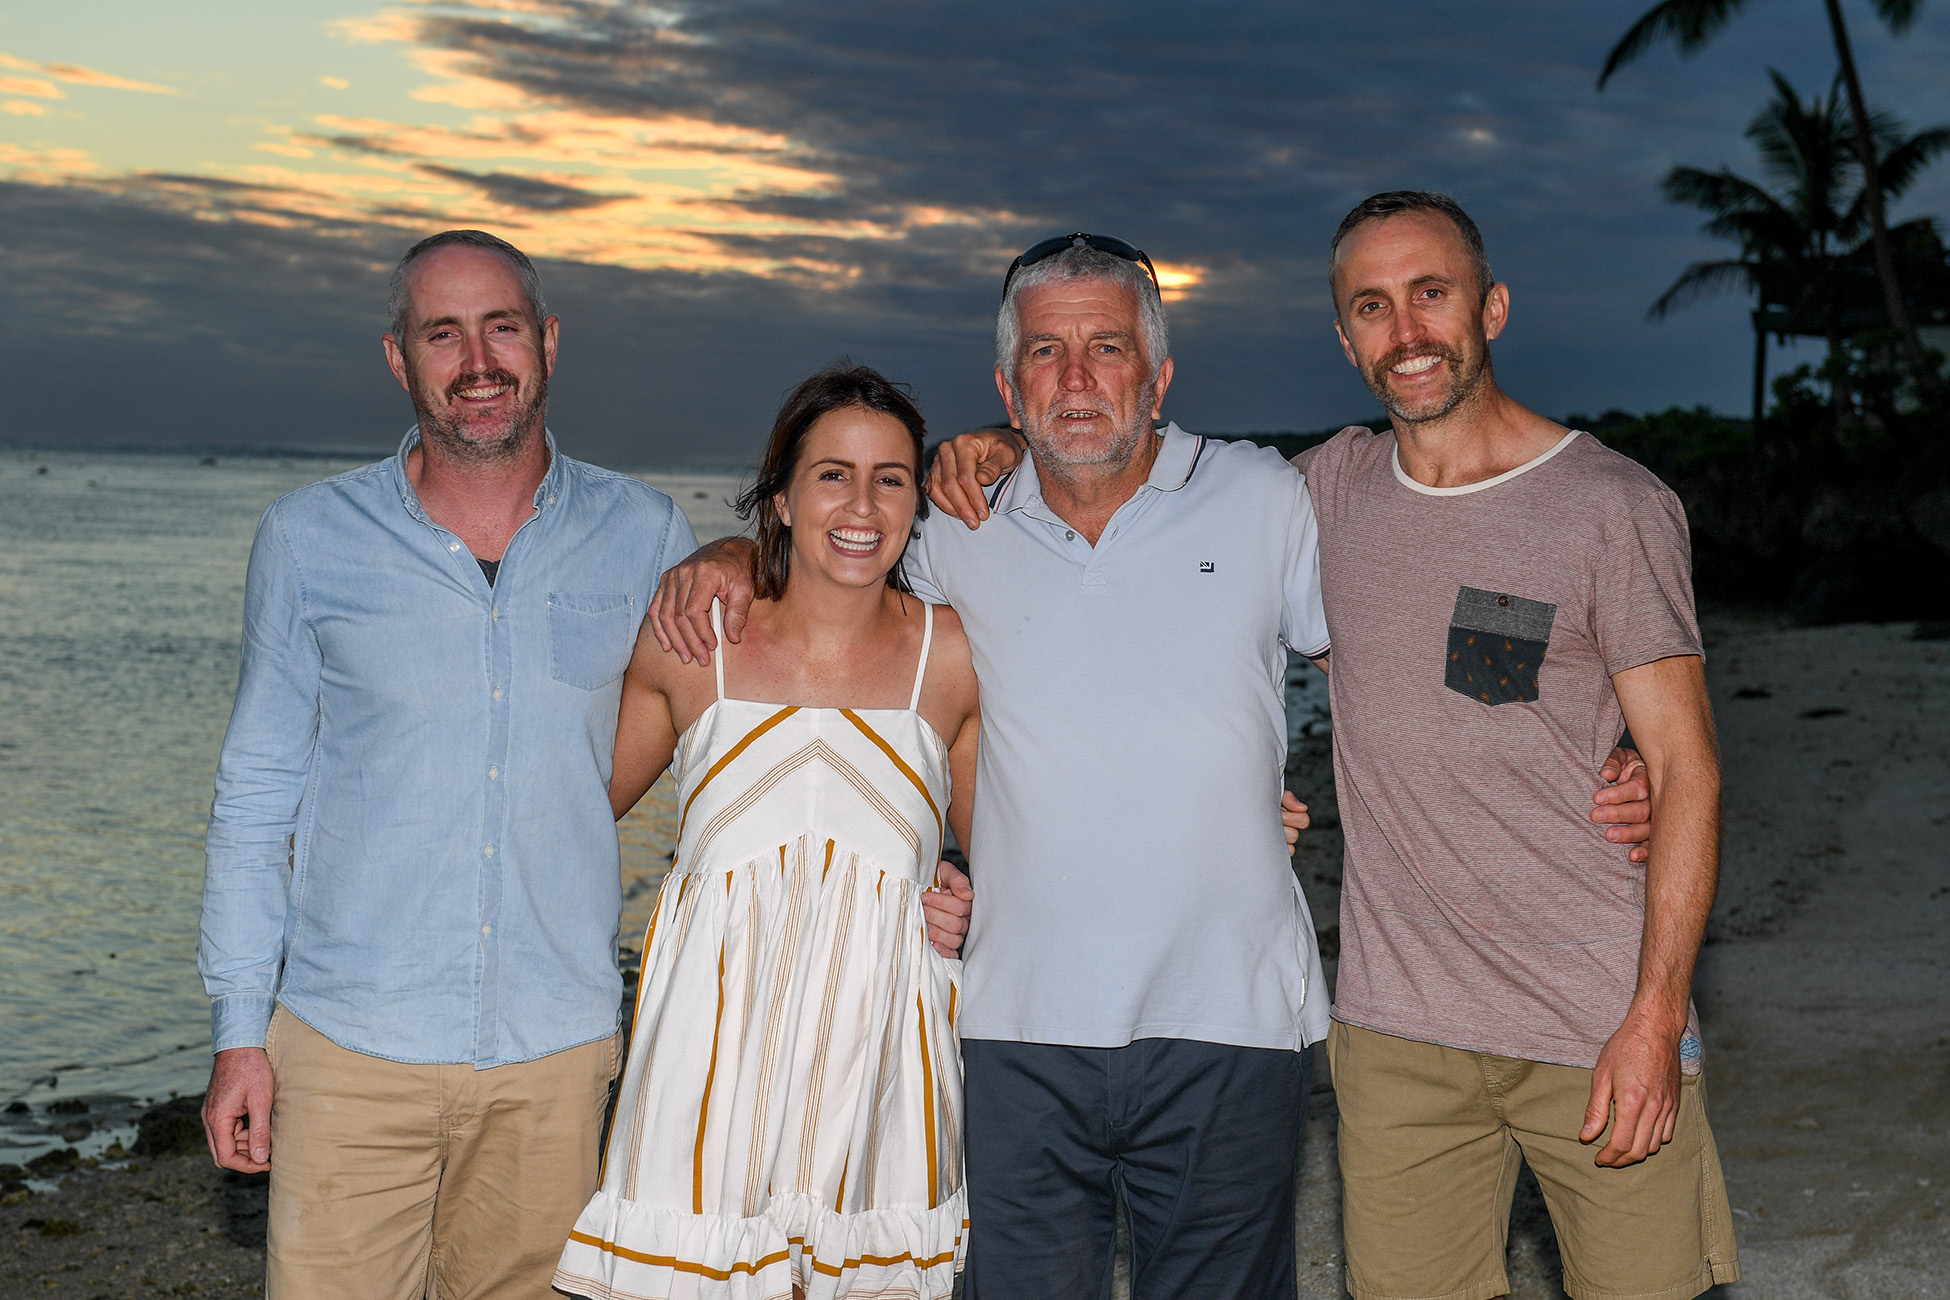 Group shot of the father with his children at sunset in Fiji